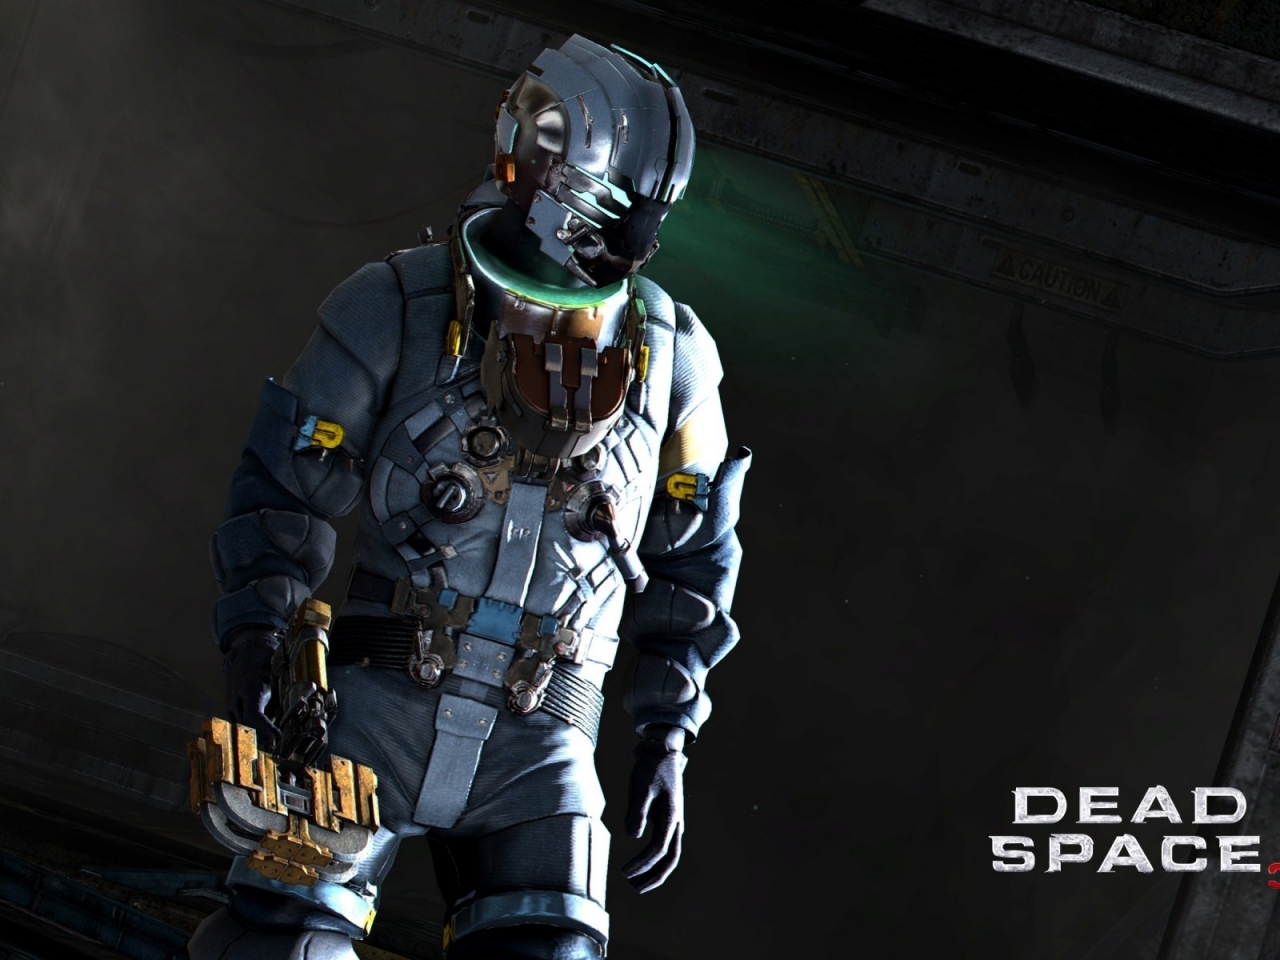 Dead Space 3 Costume for 1280 x 960 resolution